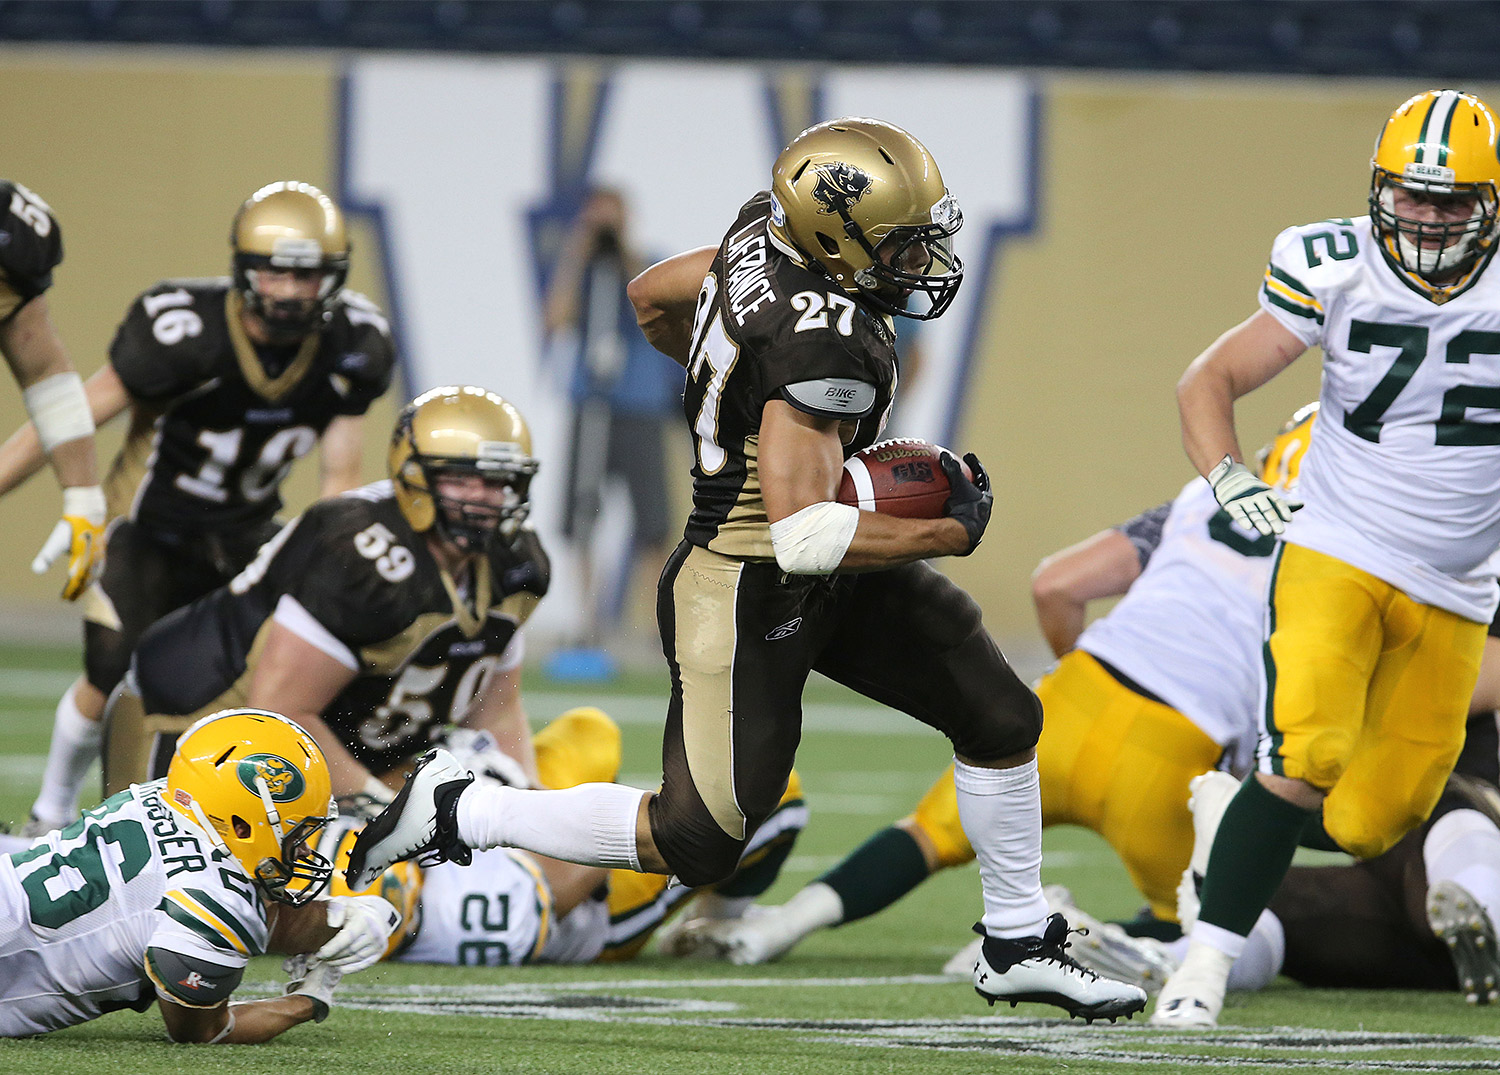 Modern-day Bisons playing at Investors Group Field.